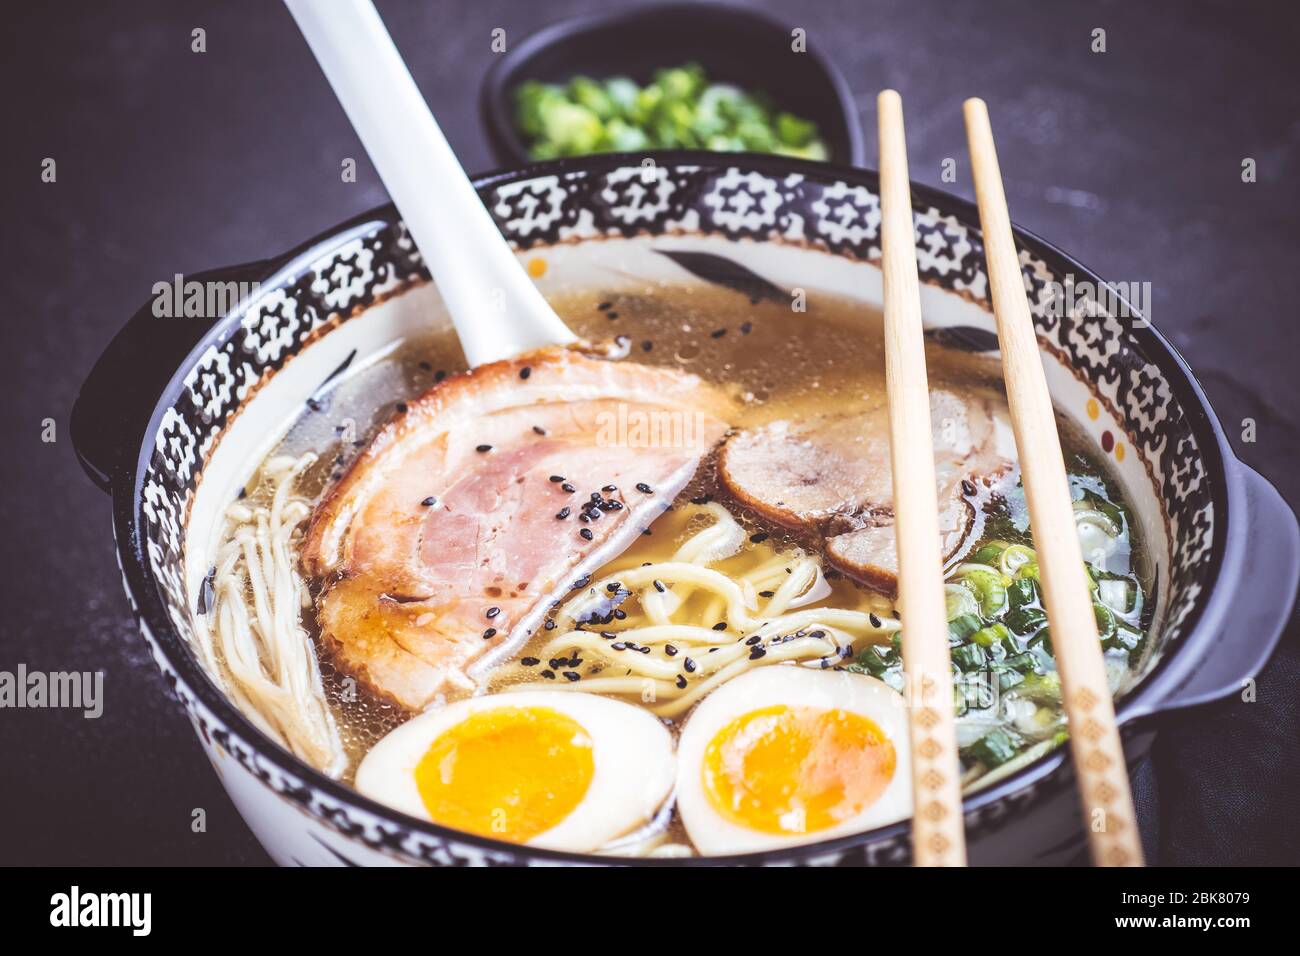 Japanese Traditional Ramen Soup with Pork, Eggs and Homemade Udon Noodles Stock Photo